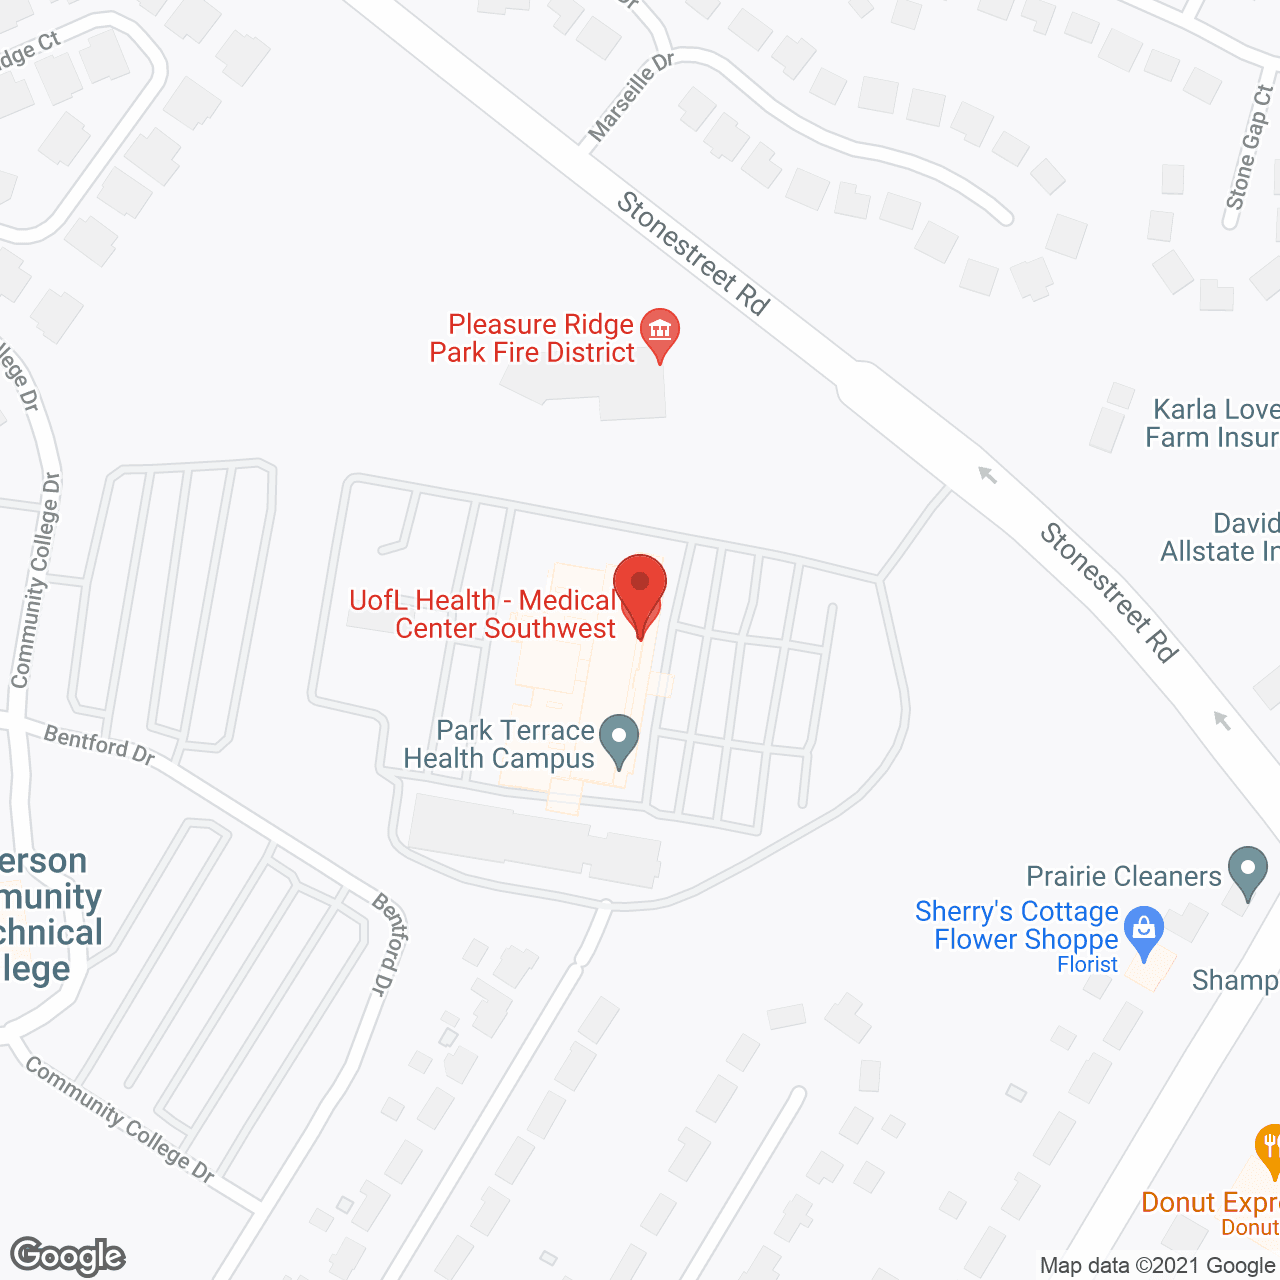 Park Terrace Health Campus in google map